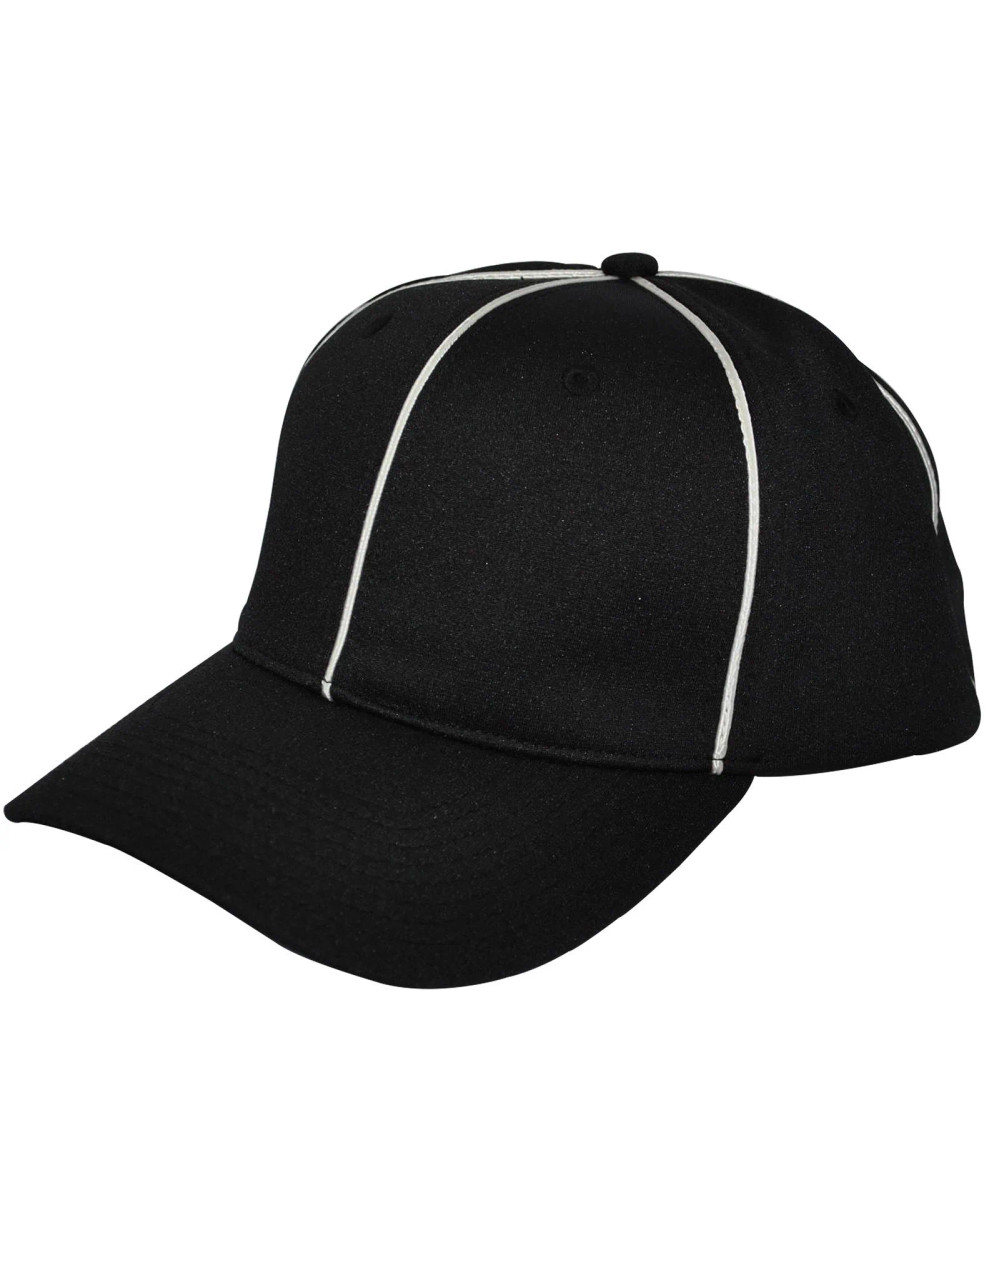 Piping White Black Smitty Official Hat Flex - w/ Fit Products Football Get